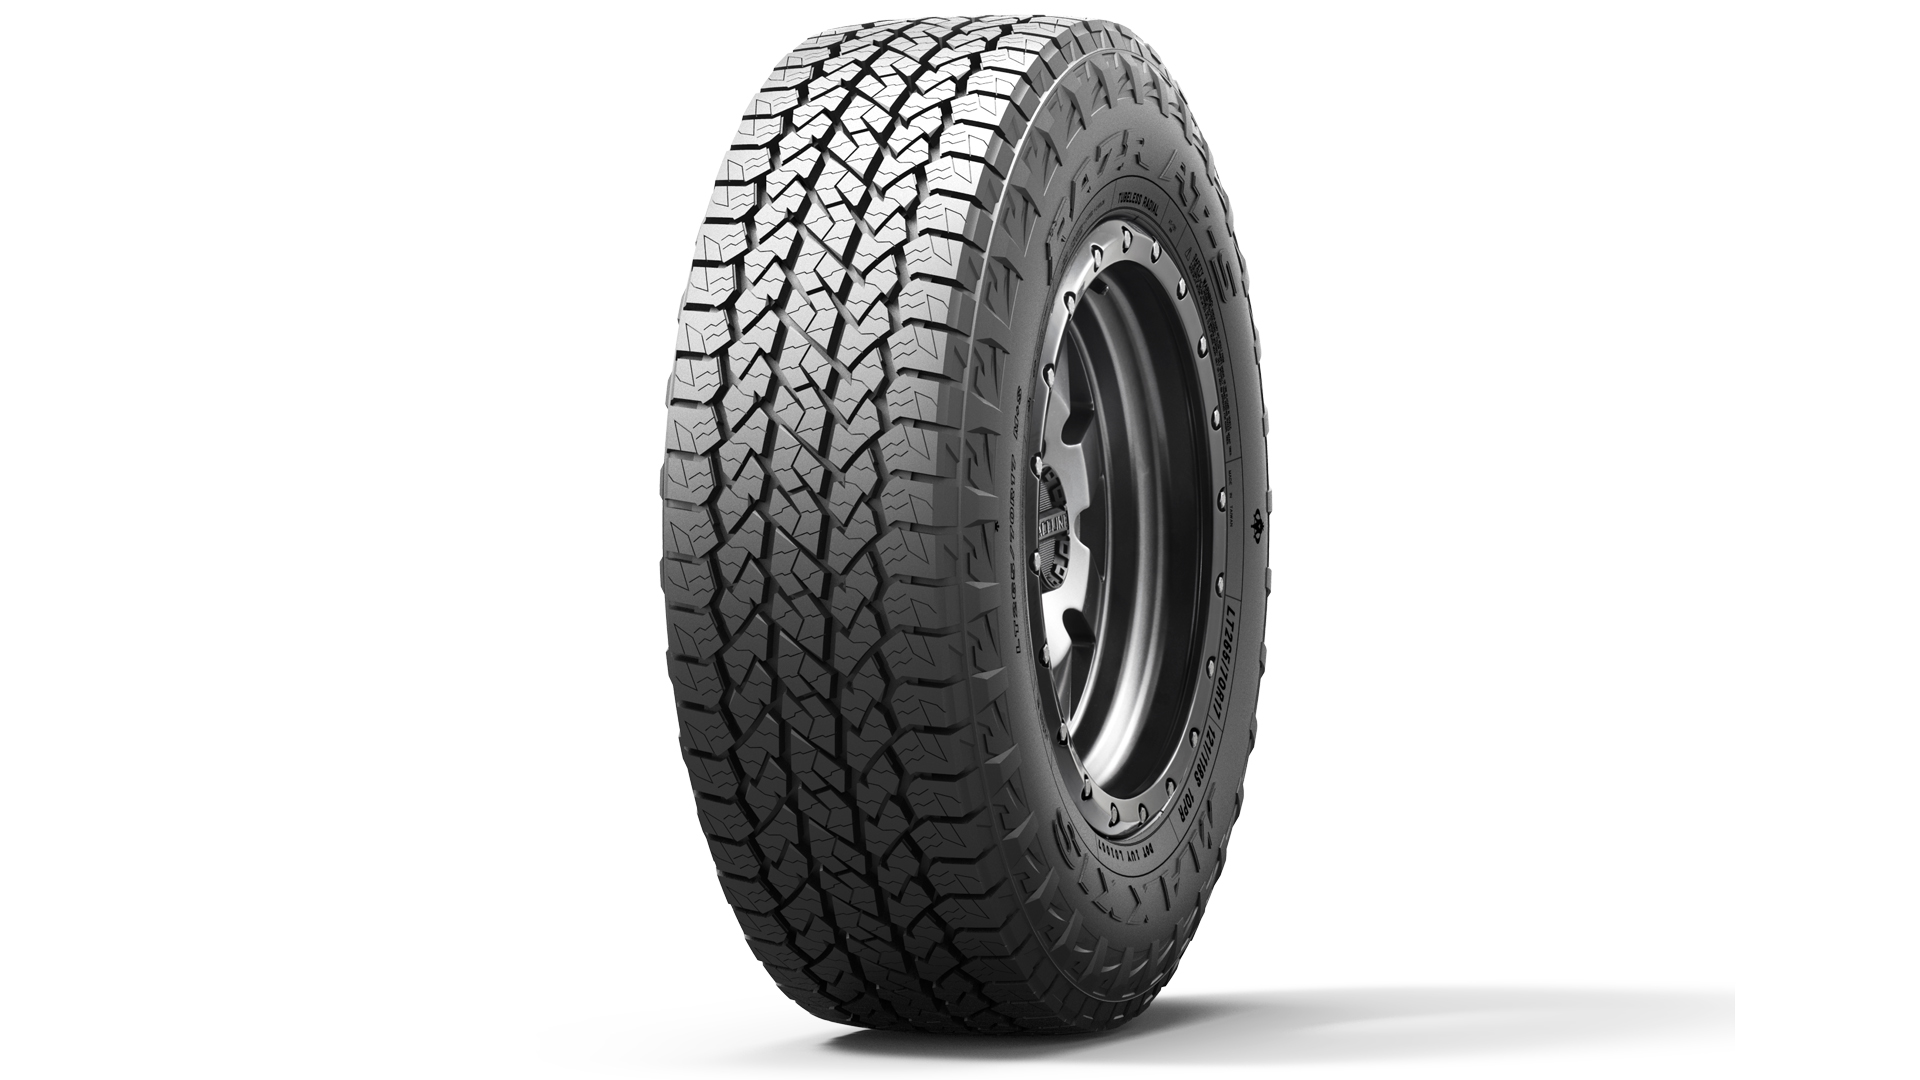 All-Terrain Tire For 4x4 Vehicles